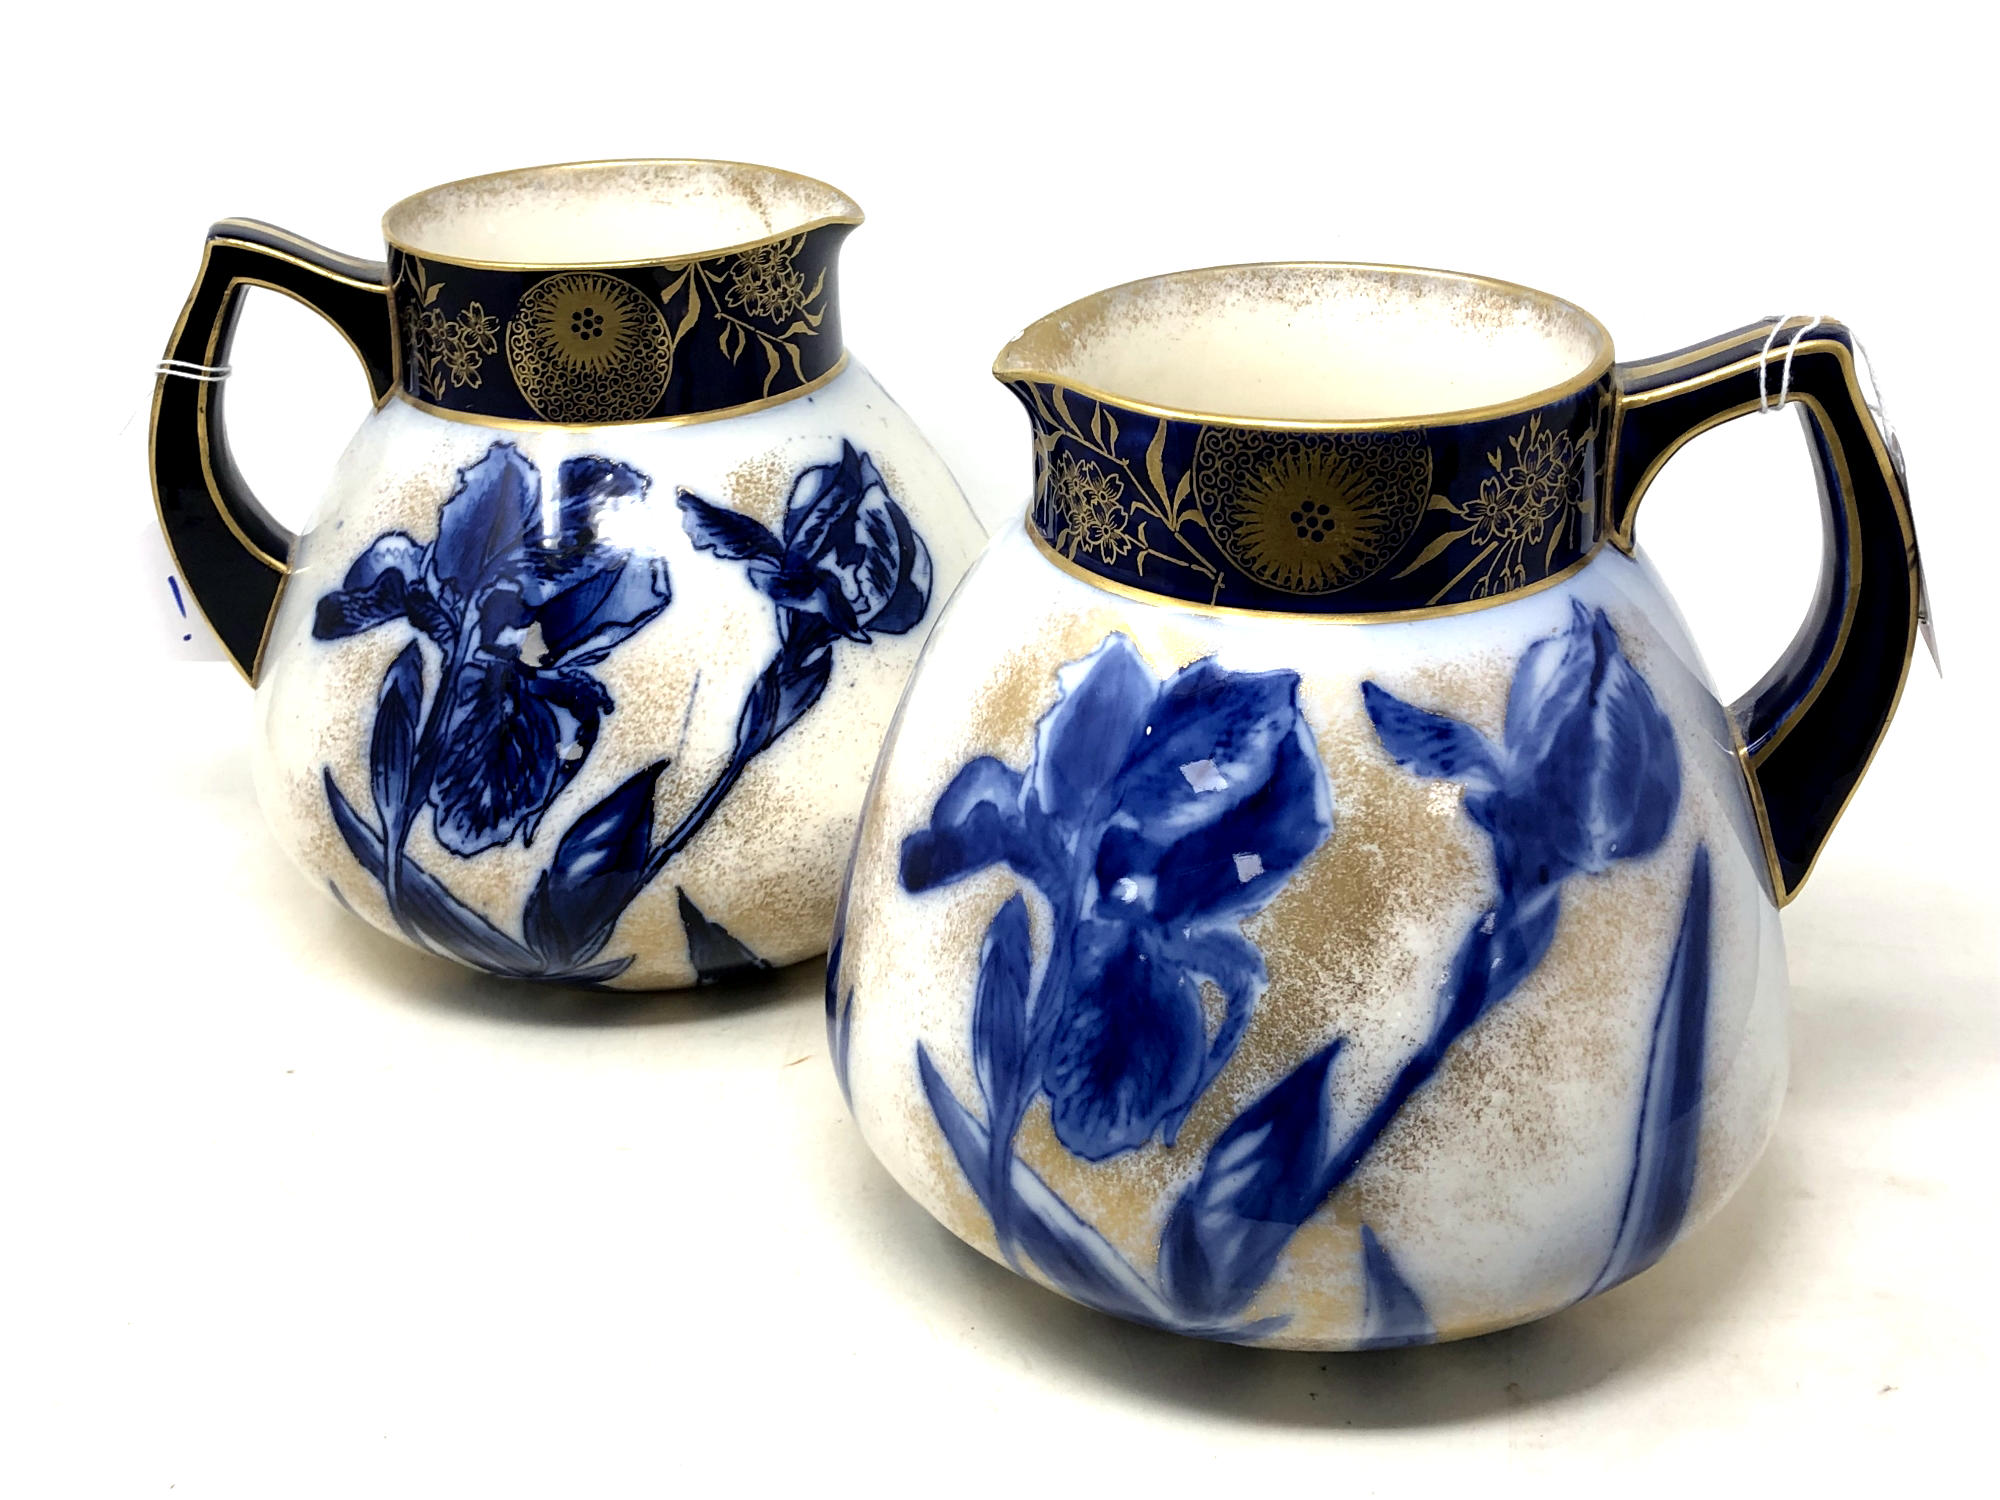 A pair of Art Nouveau Doulton Burslem blue and white iris pattern water jugs with gilt rims and